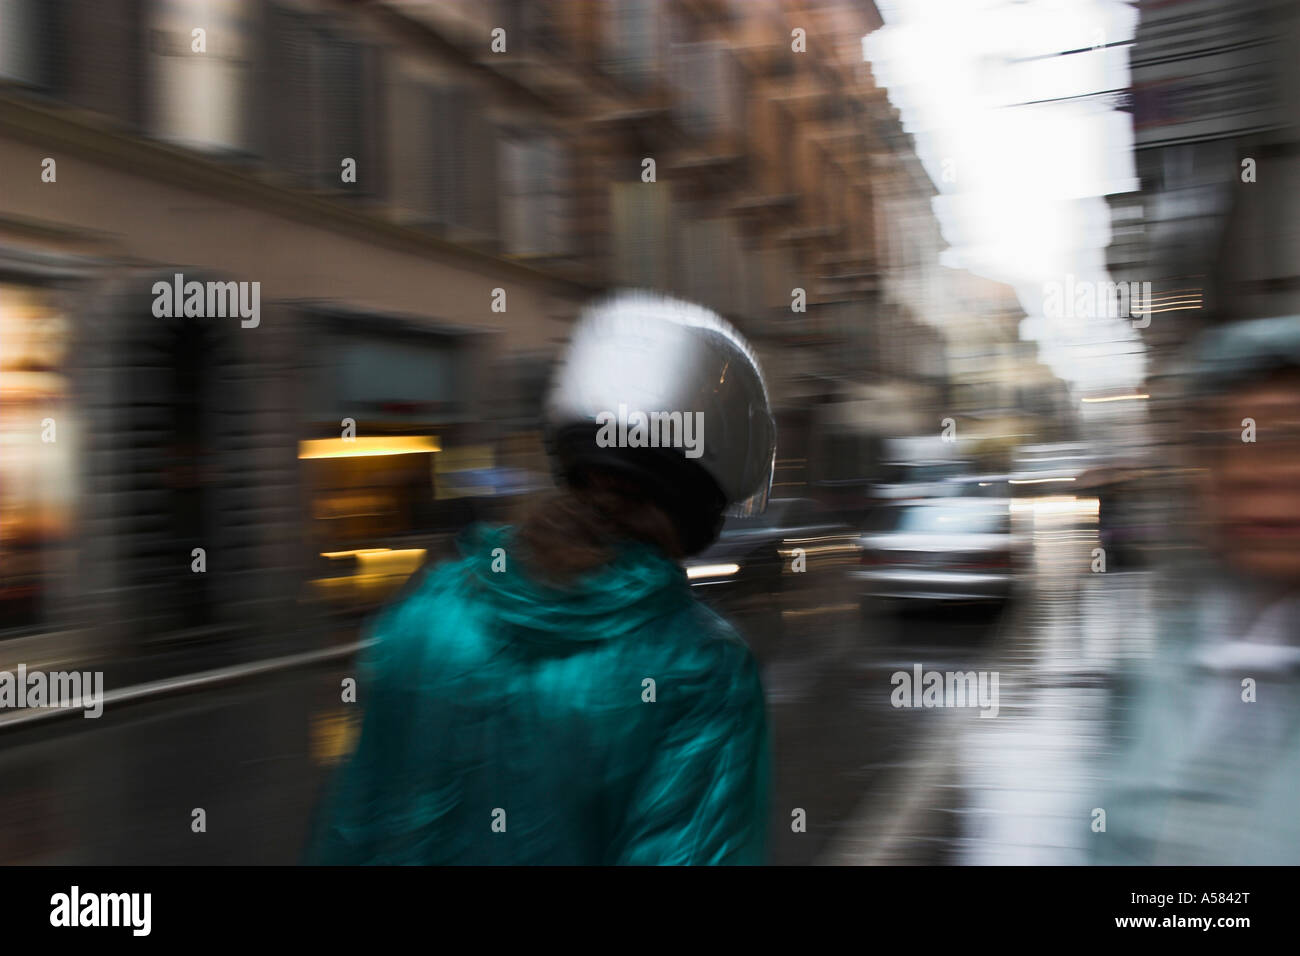 Young woman with helmet and rain-jacket, rainy weather, Rome, Italy Stock Photo